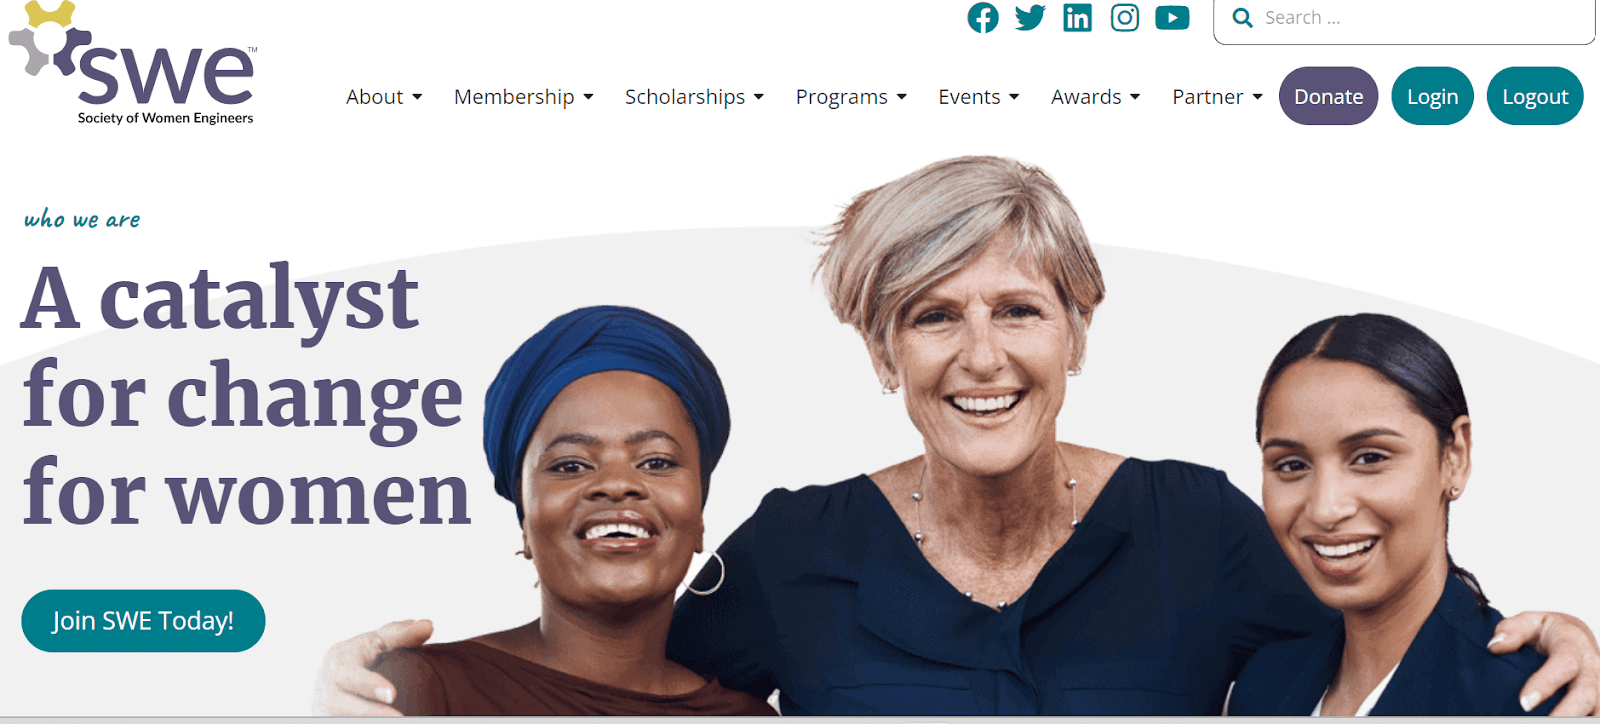 This is a screenshot of the Society of Women Engineers website homepage, which shows an image of three women smiling at the camera. 